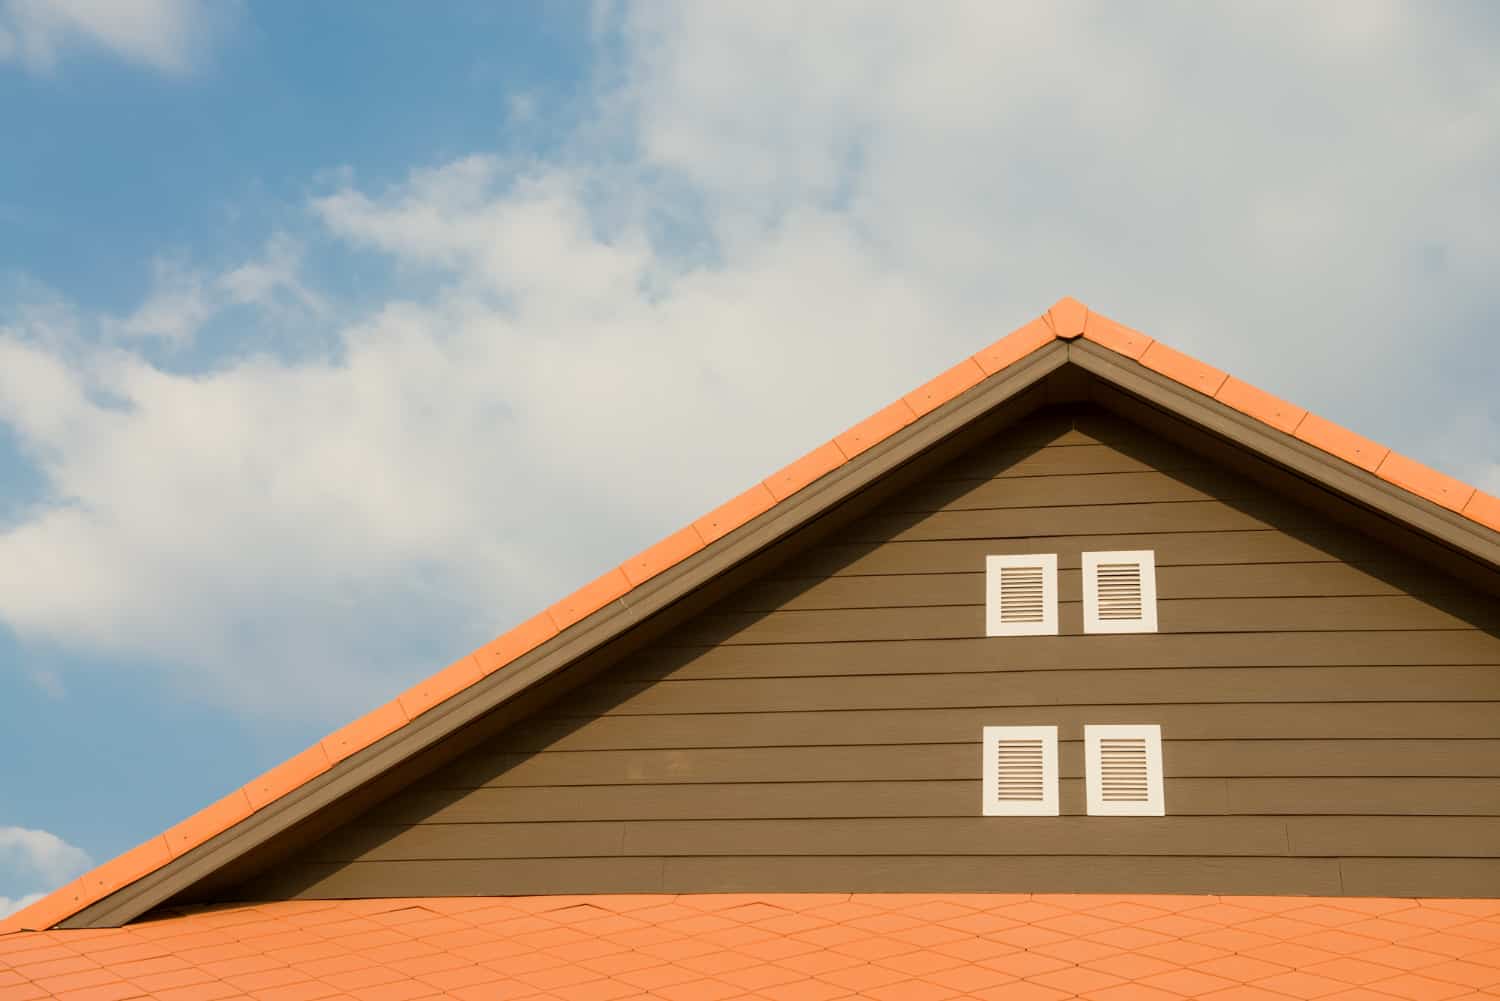 Image shows an orange roof on a brown home with a bright blue background